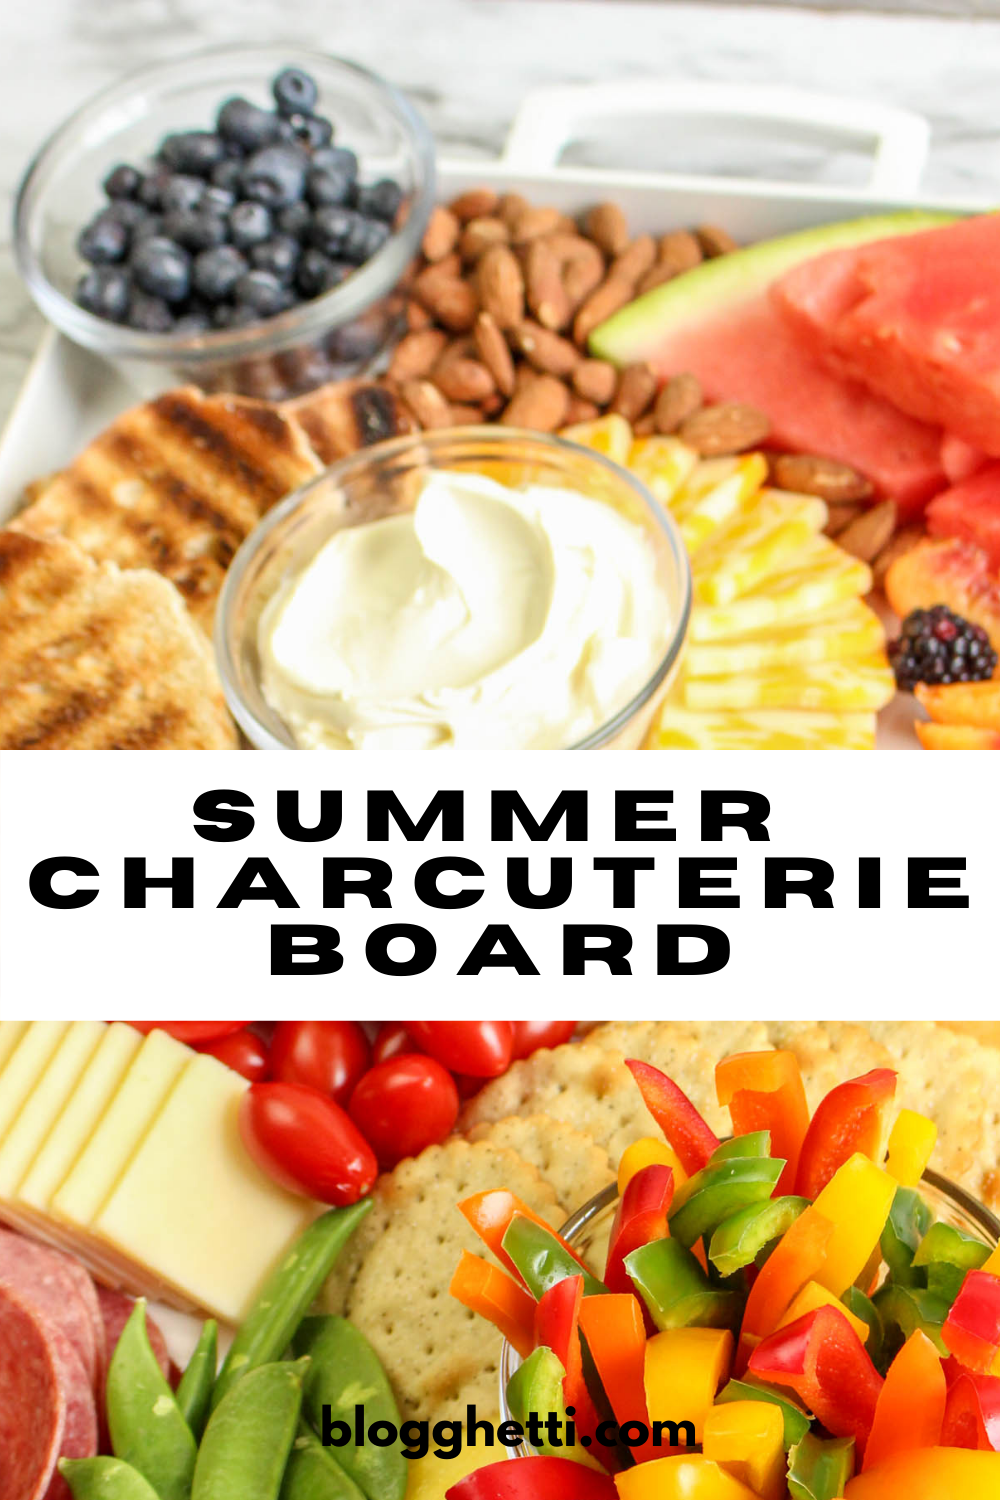 https://blogghetti.com/wp-content/uploads/2021/05/summer-charcuterie-board-with-text-overlay-for-pinterest.png